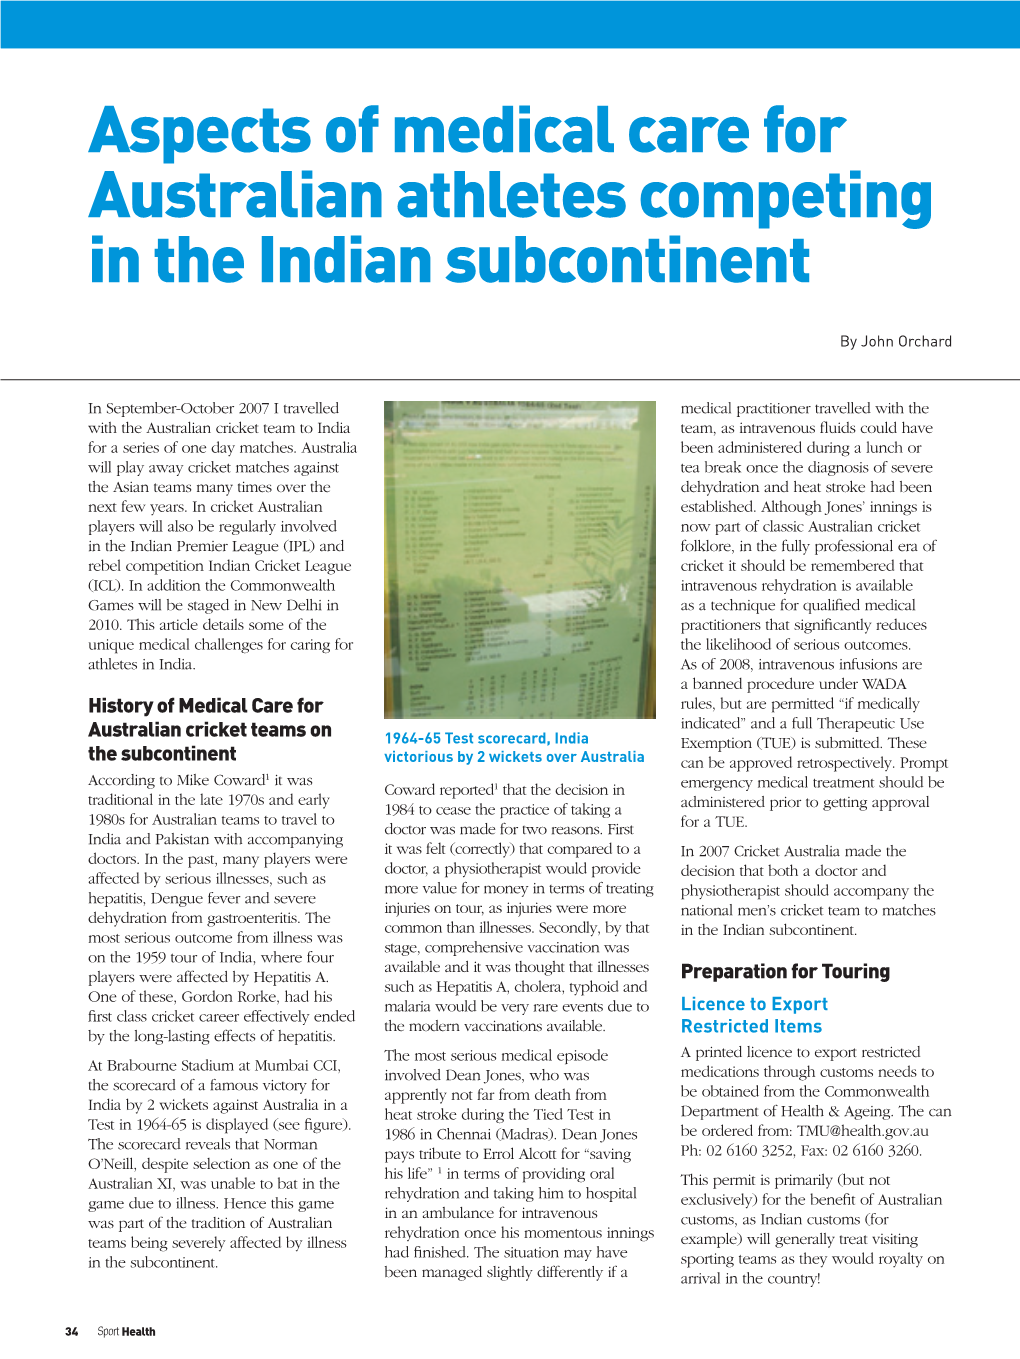 Aspects of Medical Care for Australian Athletes Competing in the Indian Subcontinent